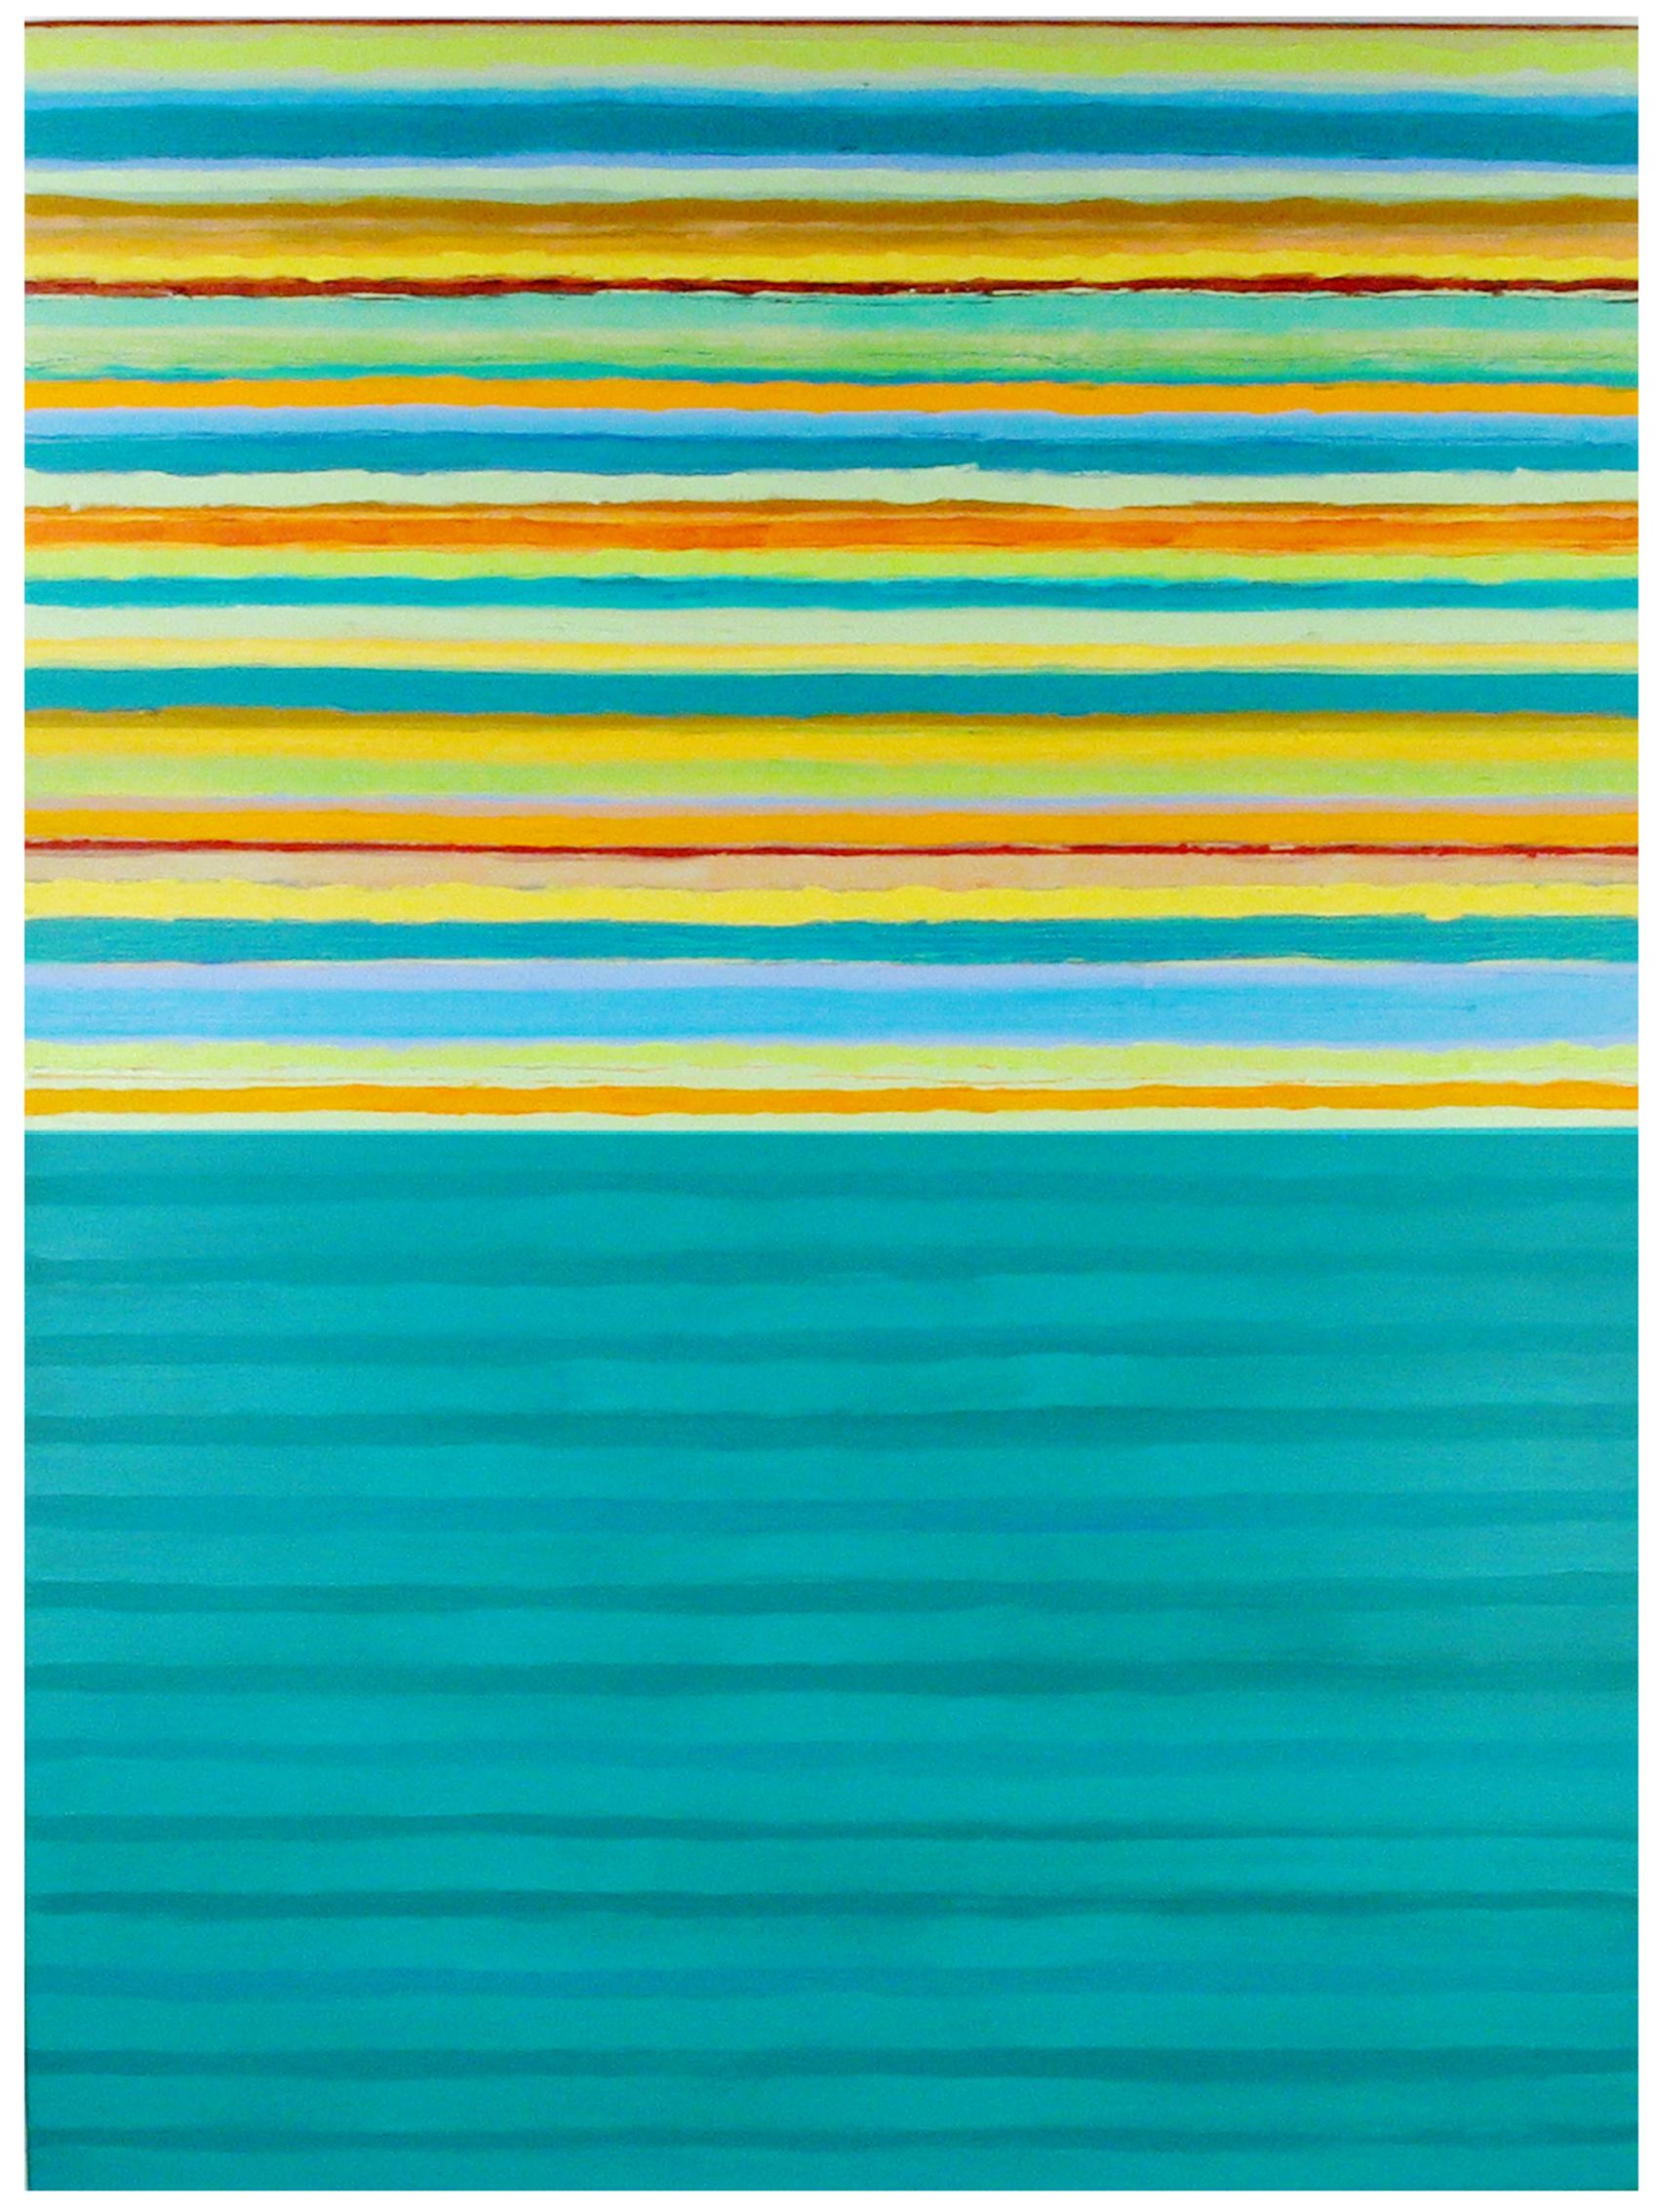 Tutto Eight, Light Teal Blue, Lime Green, Golden Yellow Orange Stripes - Painting by Joanne Mattera